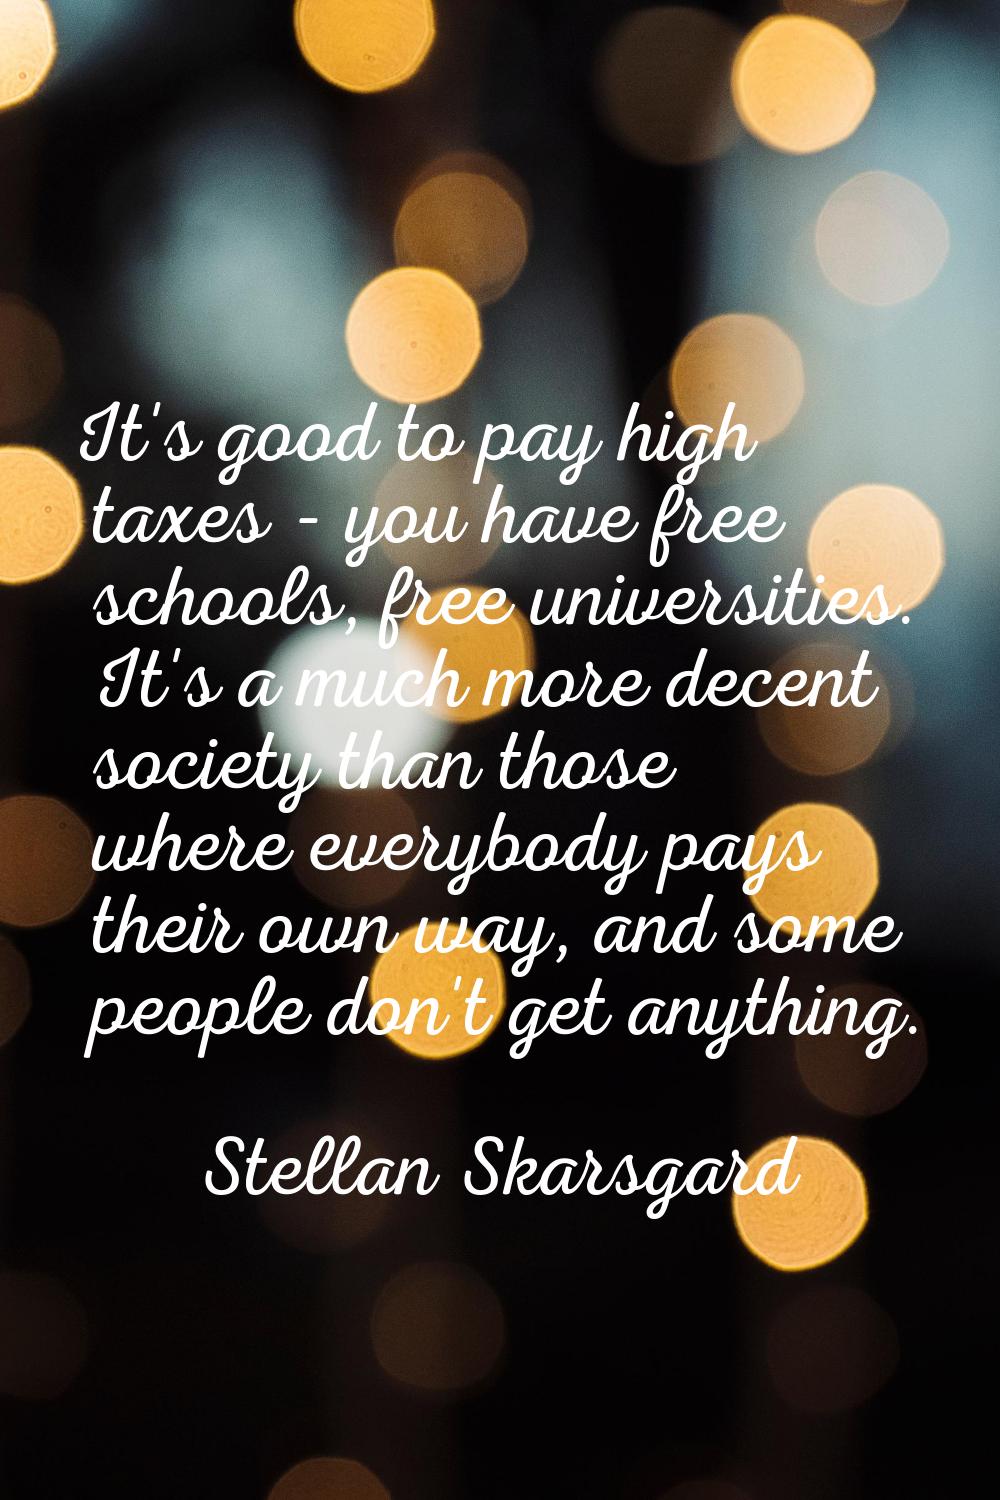 It's good to pay high taxes - you have free schools, free universities. It's a much more decent soc